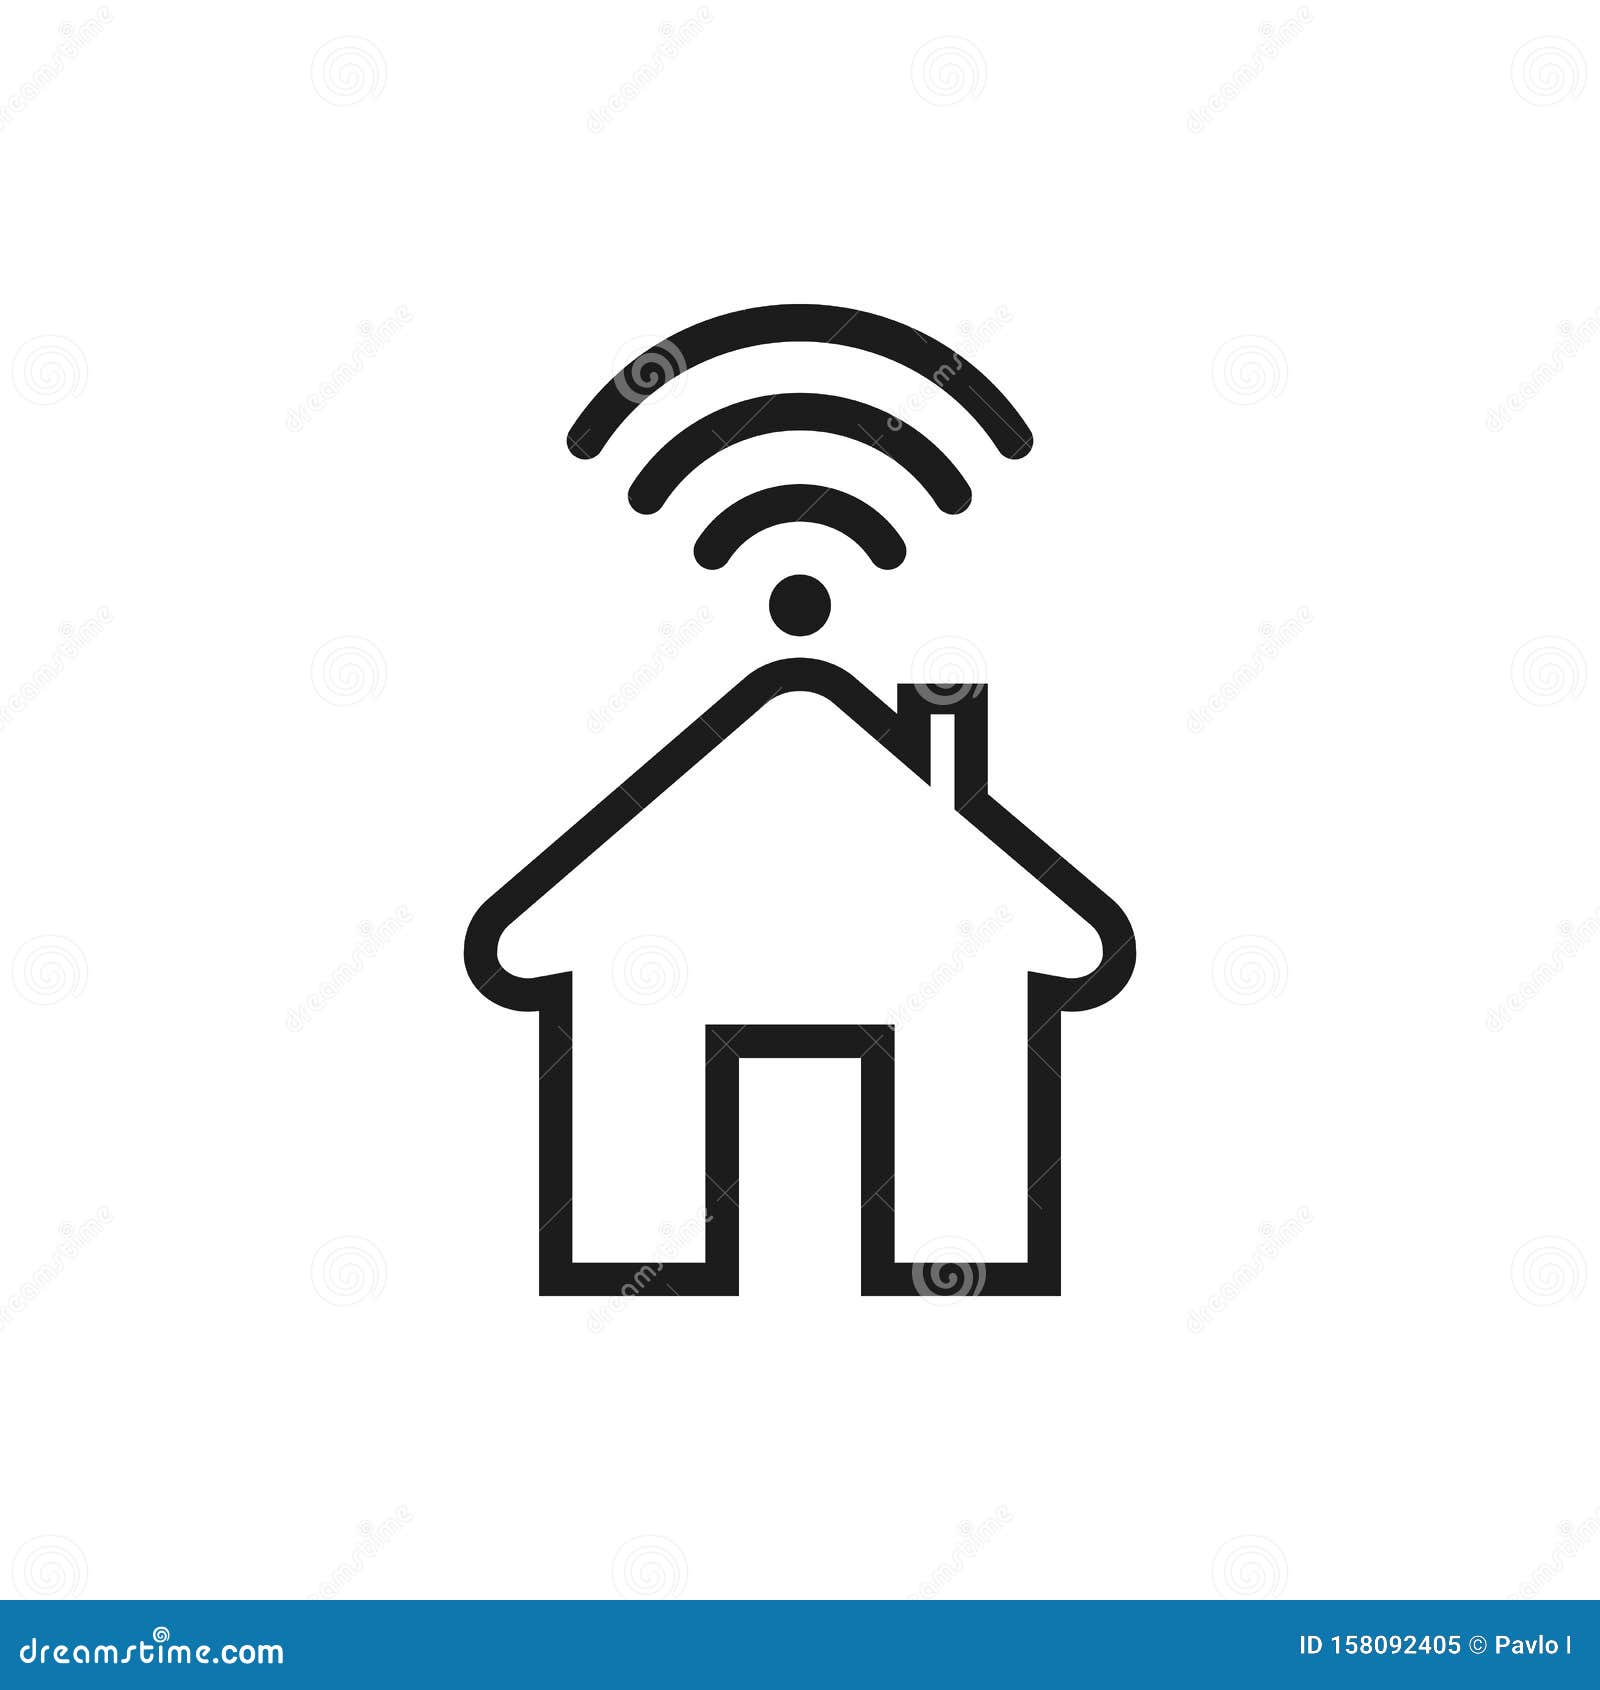 Download Smart Home Icon With Signal - Vector Stock Illustration ...